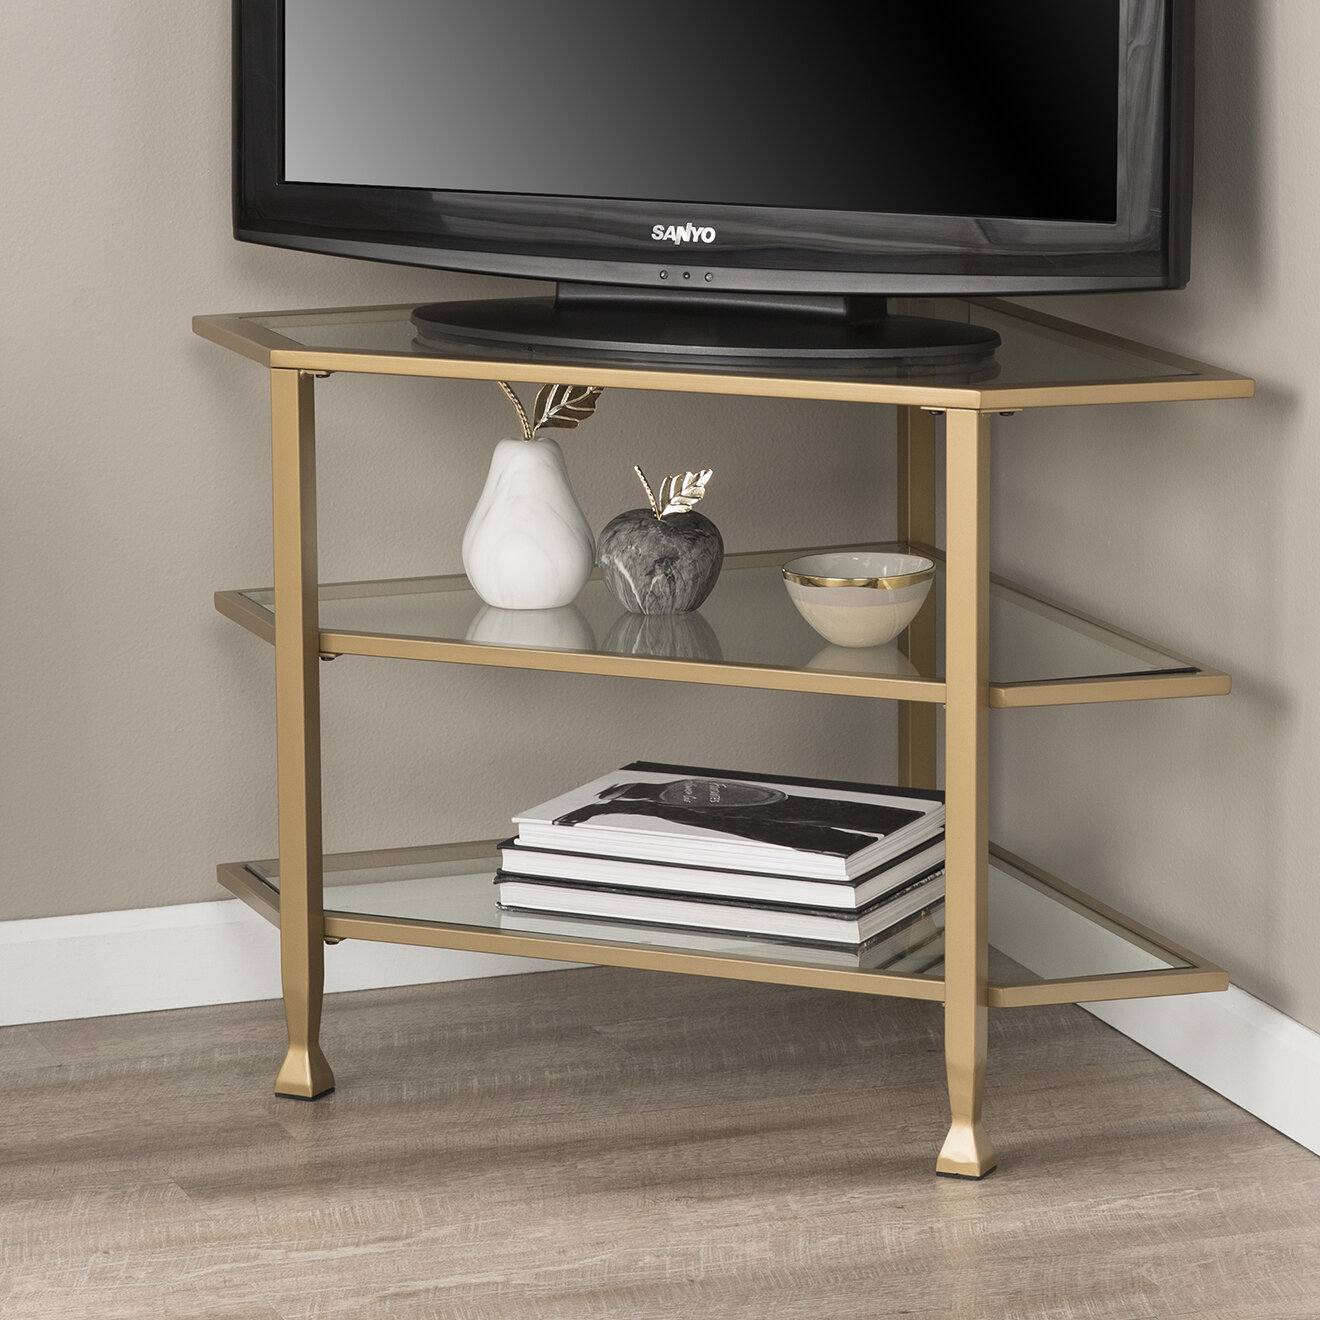 House Of Hampton Deleo Corner Tv Stand For Tvs Up To 40 Reviews